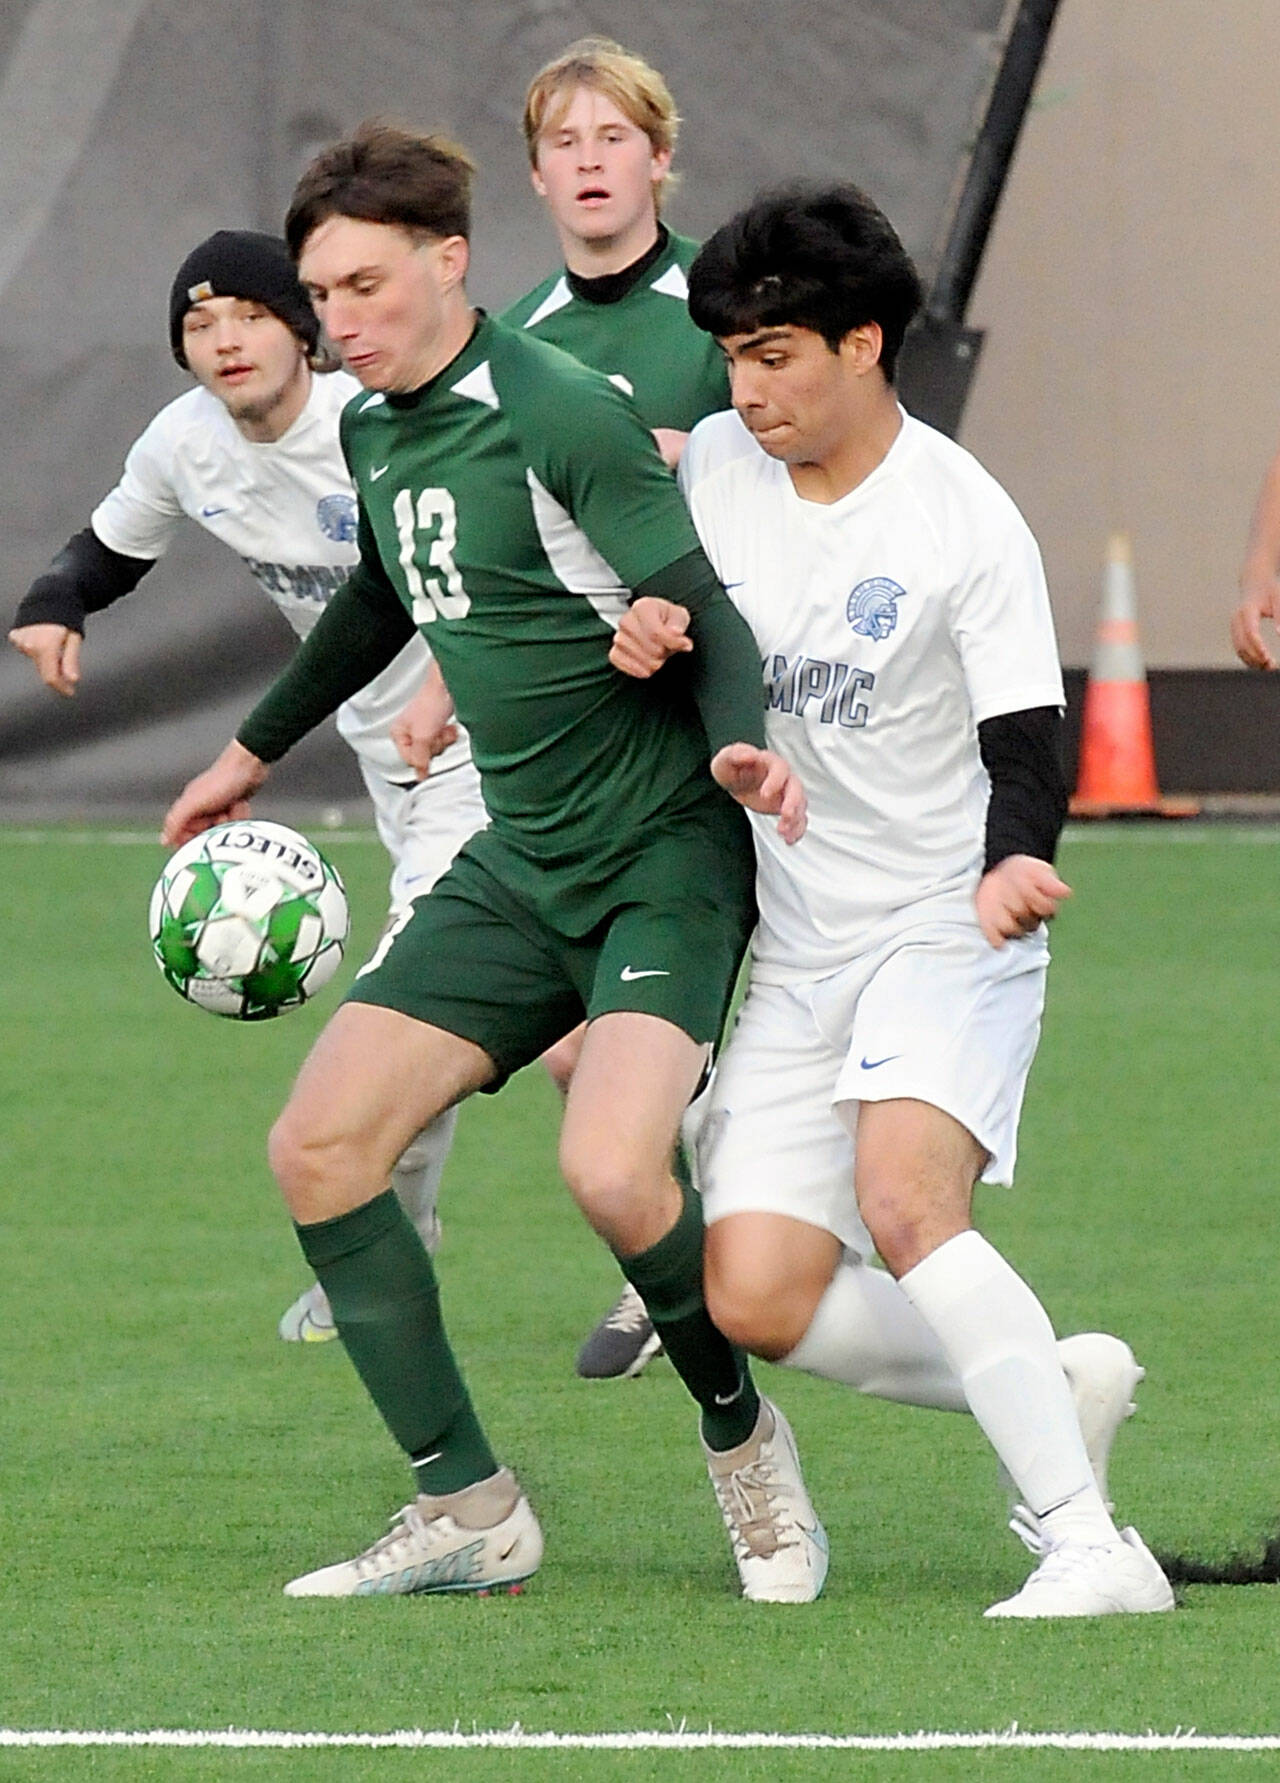 KEITH THORPE/PENINSULA DAILY NEWS Port Angeles’ Caden White, center, slips past Olympic’s Andres Manriquez, right, as Olympic midfielders Gavin Christensen, rear left, and Port Angeles’ Hannes Spieker keep watch on Thursday at Peninsula College.